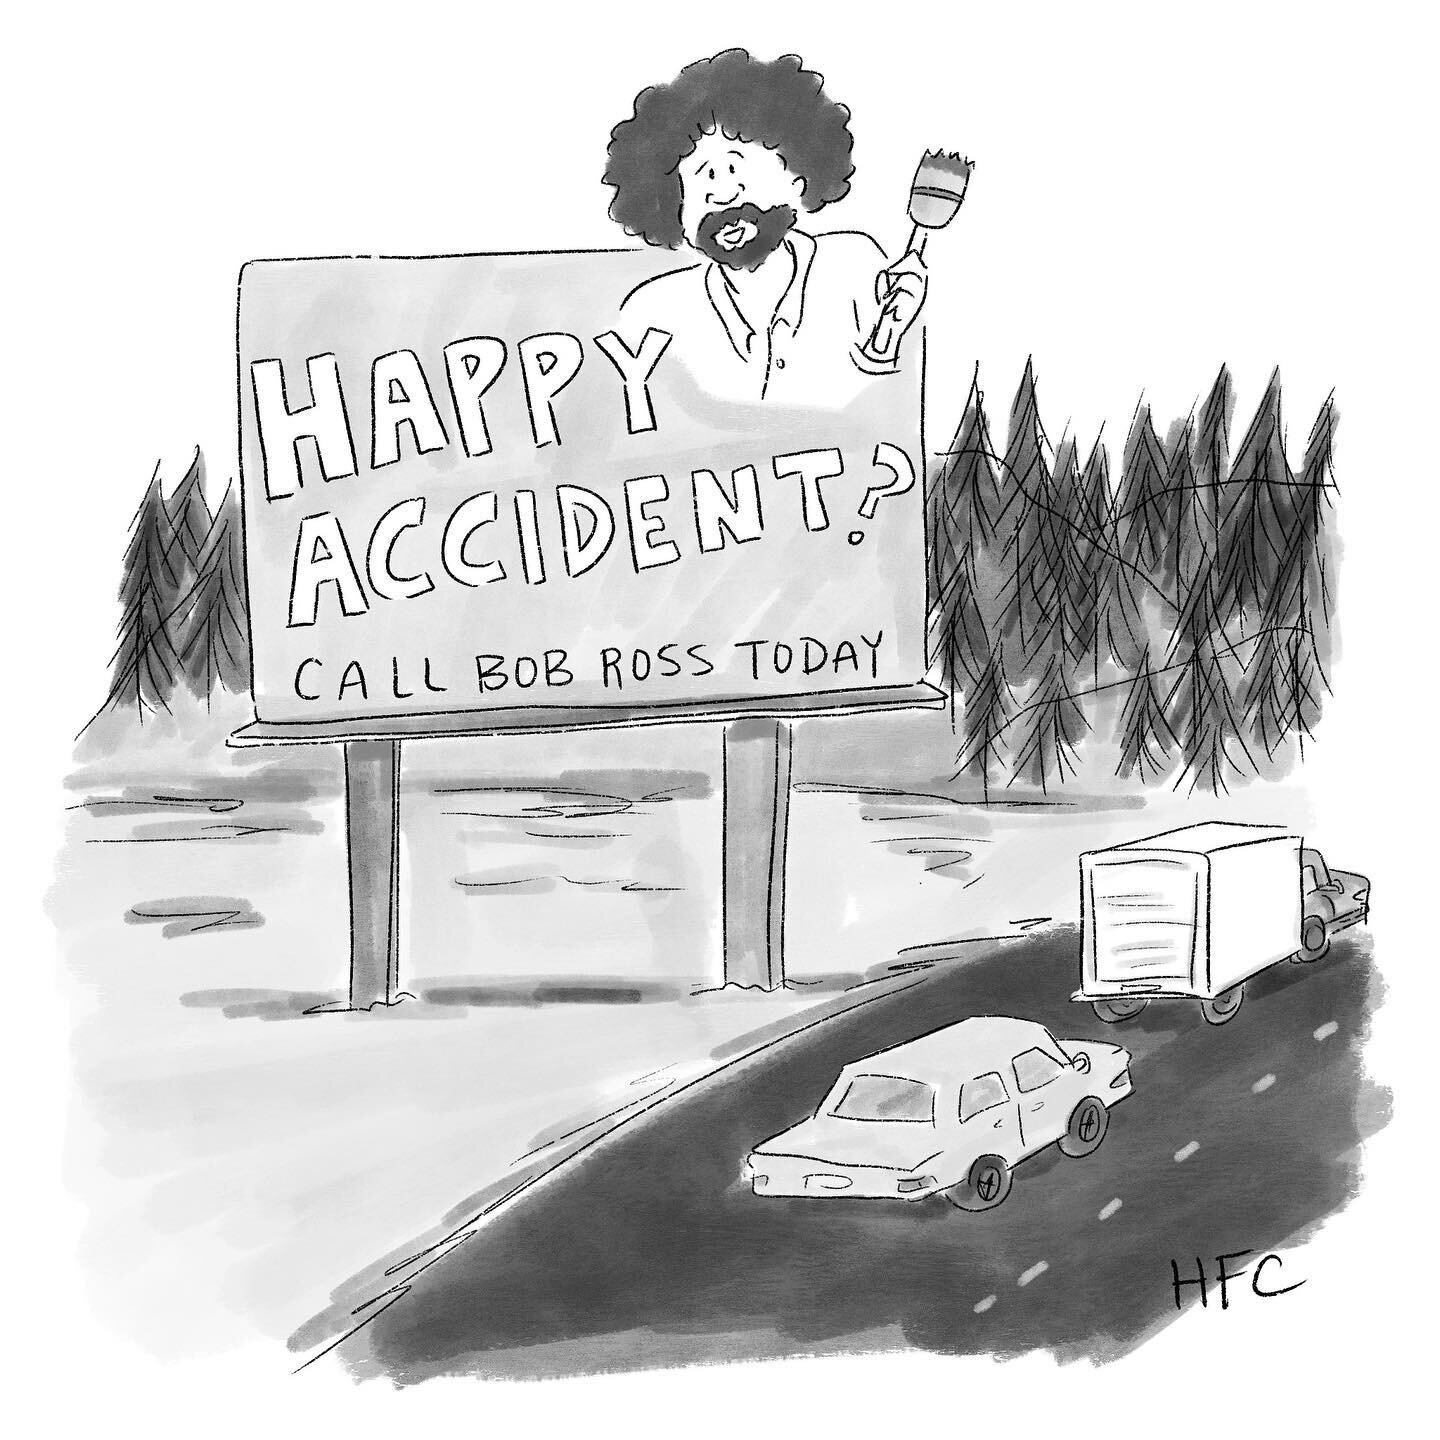 Watched the Bob Ross doc on Netflix this weekend and it's just heartbreaking. What a beautiful soul #BobRoss #HappyAccidents Prints available on Etsy!